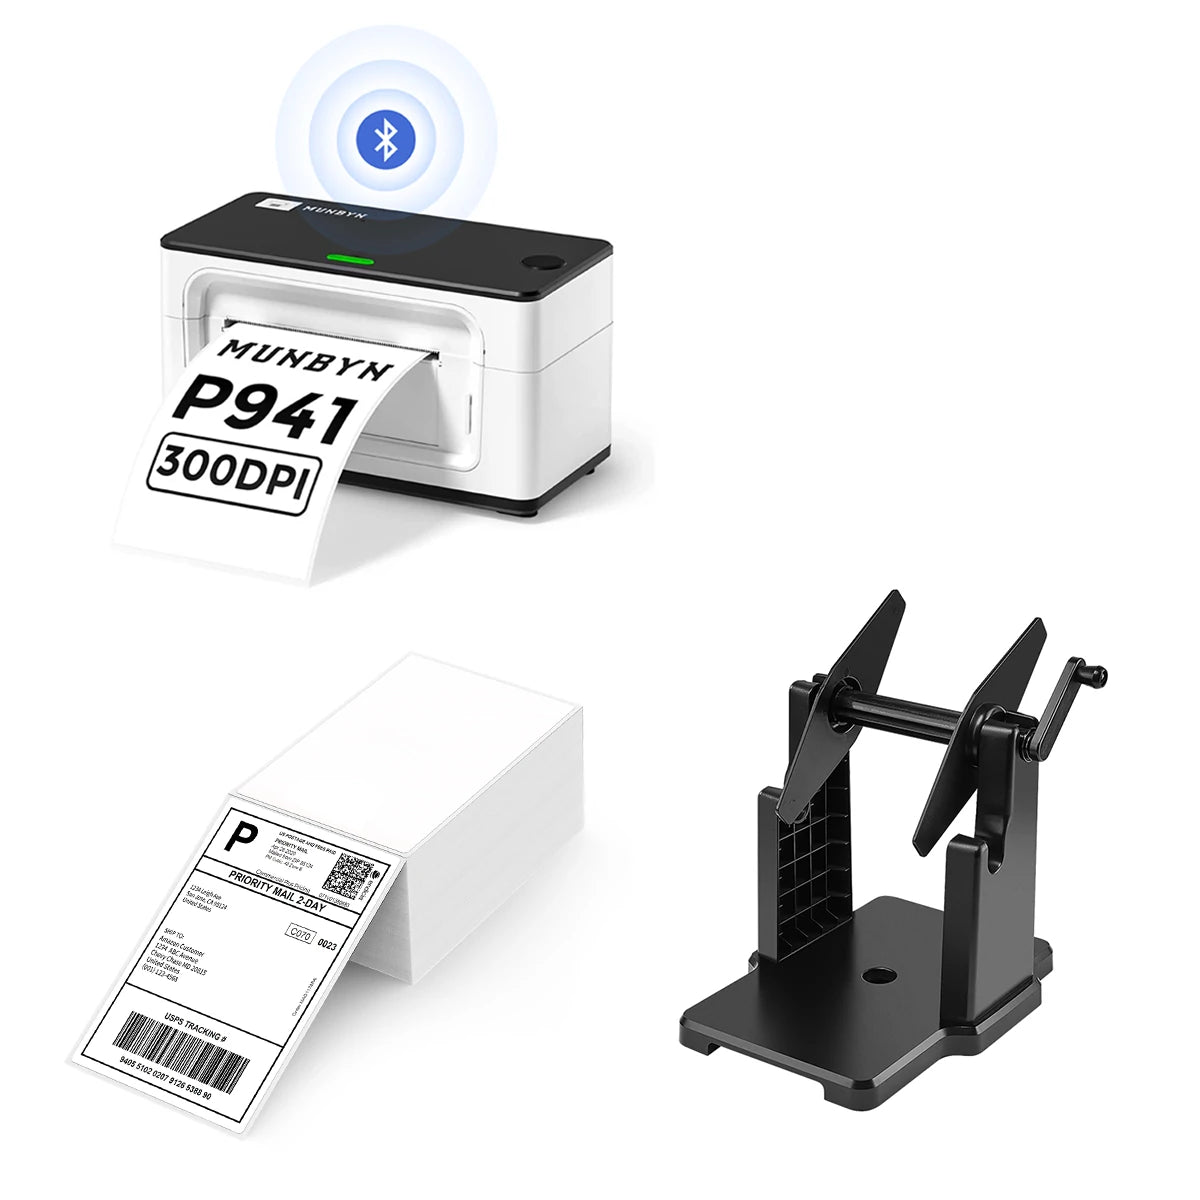 The MUNBYN 941B white Bluetooth label printer kit comes with a printer, a label holder, and a stack of shipping labels.